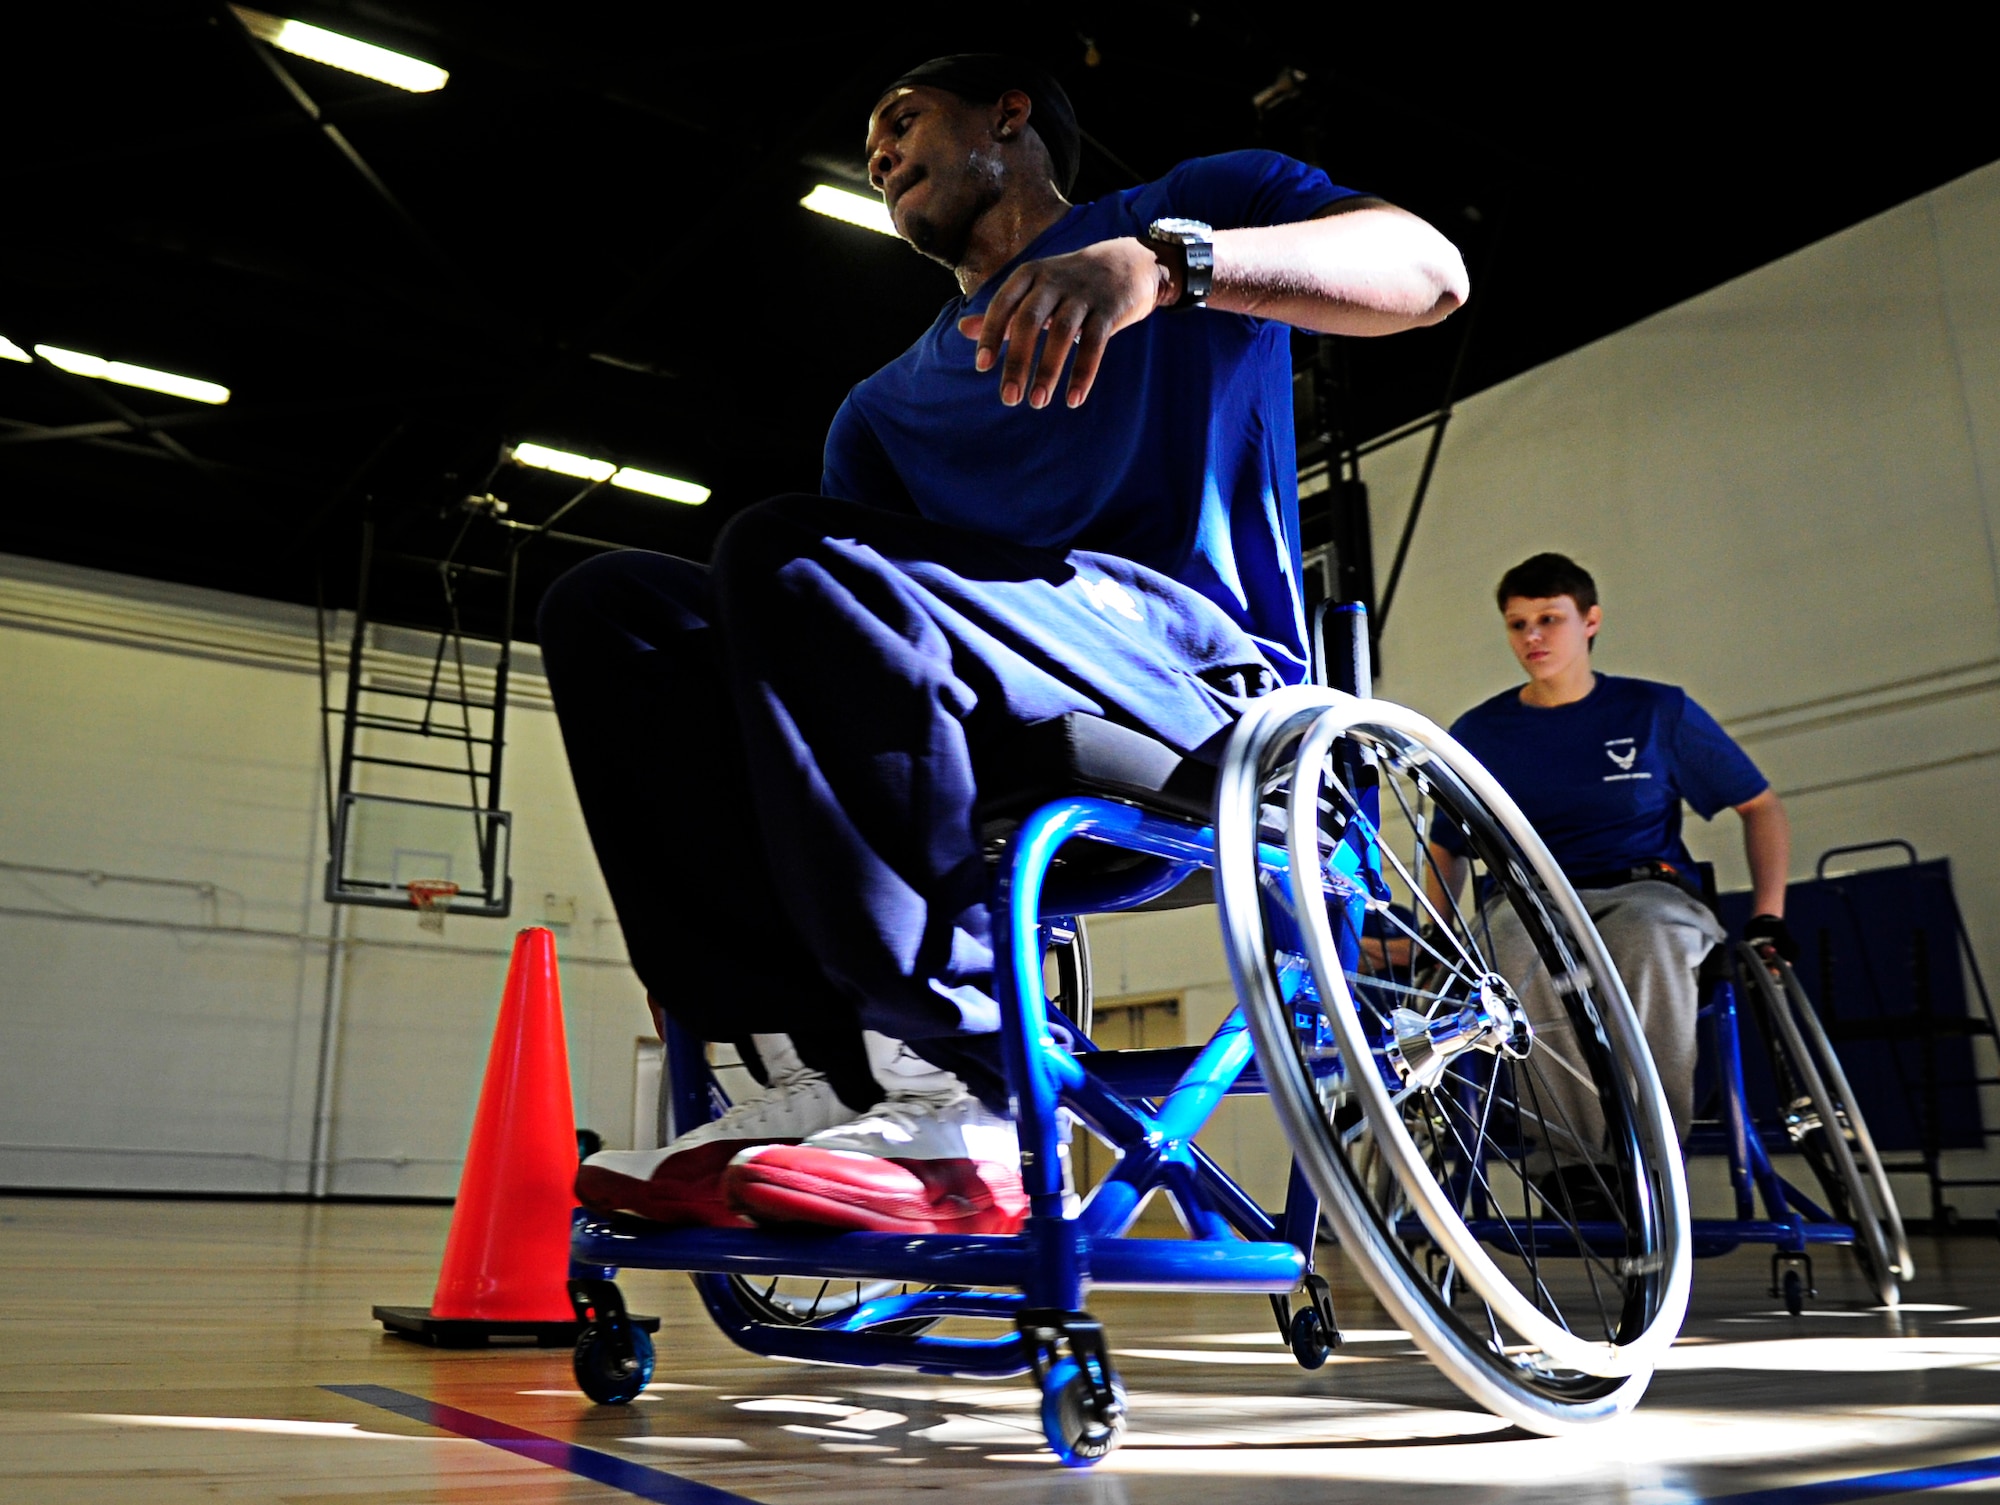 Wounded Warriors learn to maneuver through cones in a wheelchair before playing a game of wheelchair basketball during an Air Force Wounded Warrior Adaptive Sports Training Camp at the West Fitness Center at Joint Base Andrews, Md., June 26, 2013. (U.S. Air Force photo/Senior Airman Lauren Main)